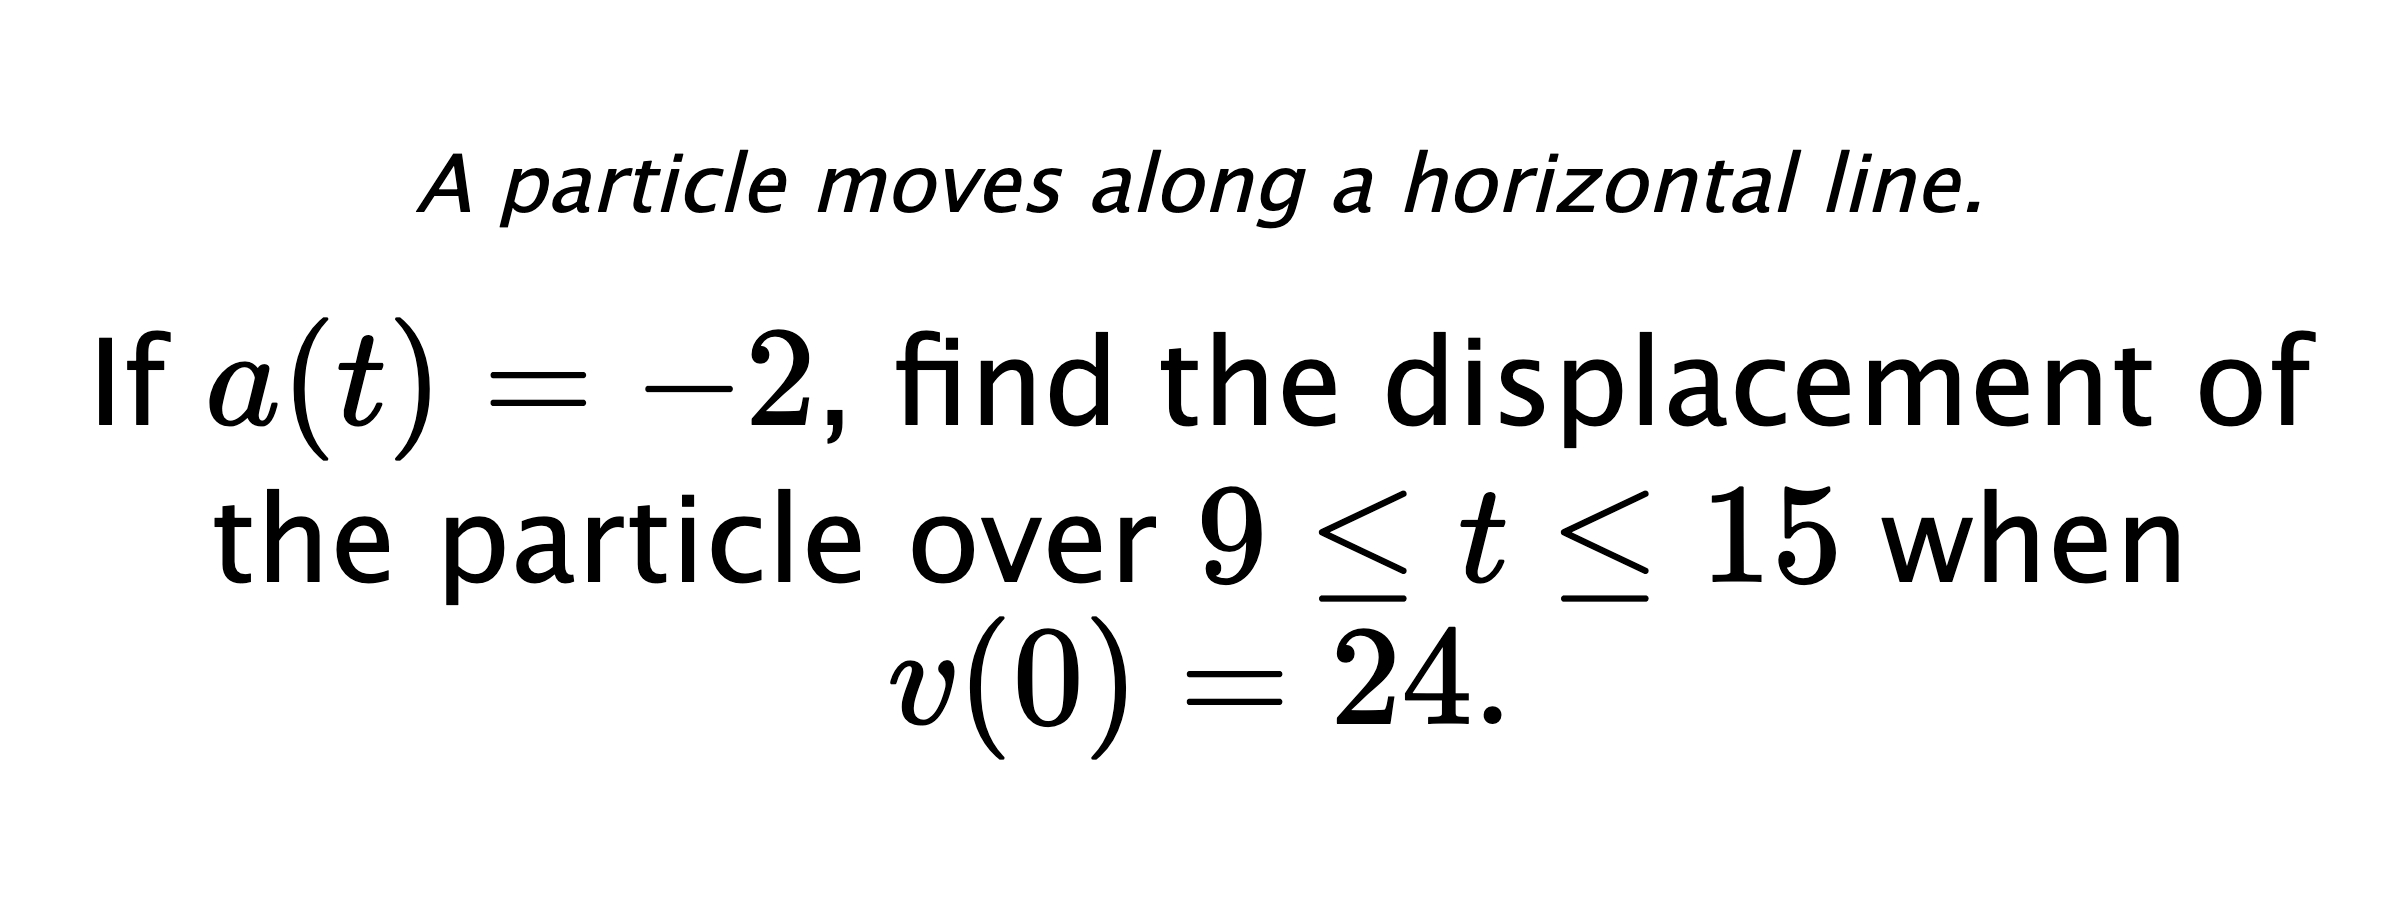 A particle moves along a horizontal line. If $ a(t)=-2 $, find the displacement of the particle over $ 9 \leq t \leq 15 $ when $ v(0)=24 .$